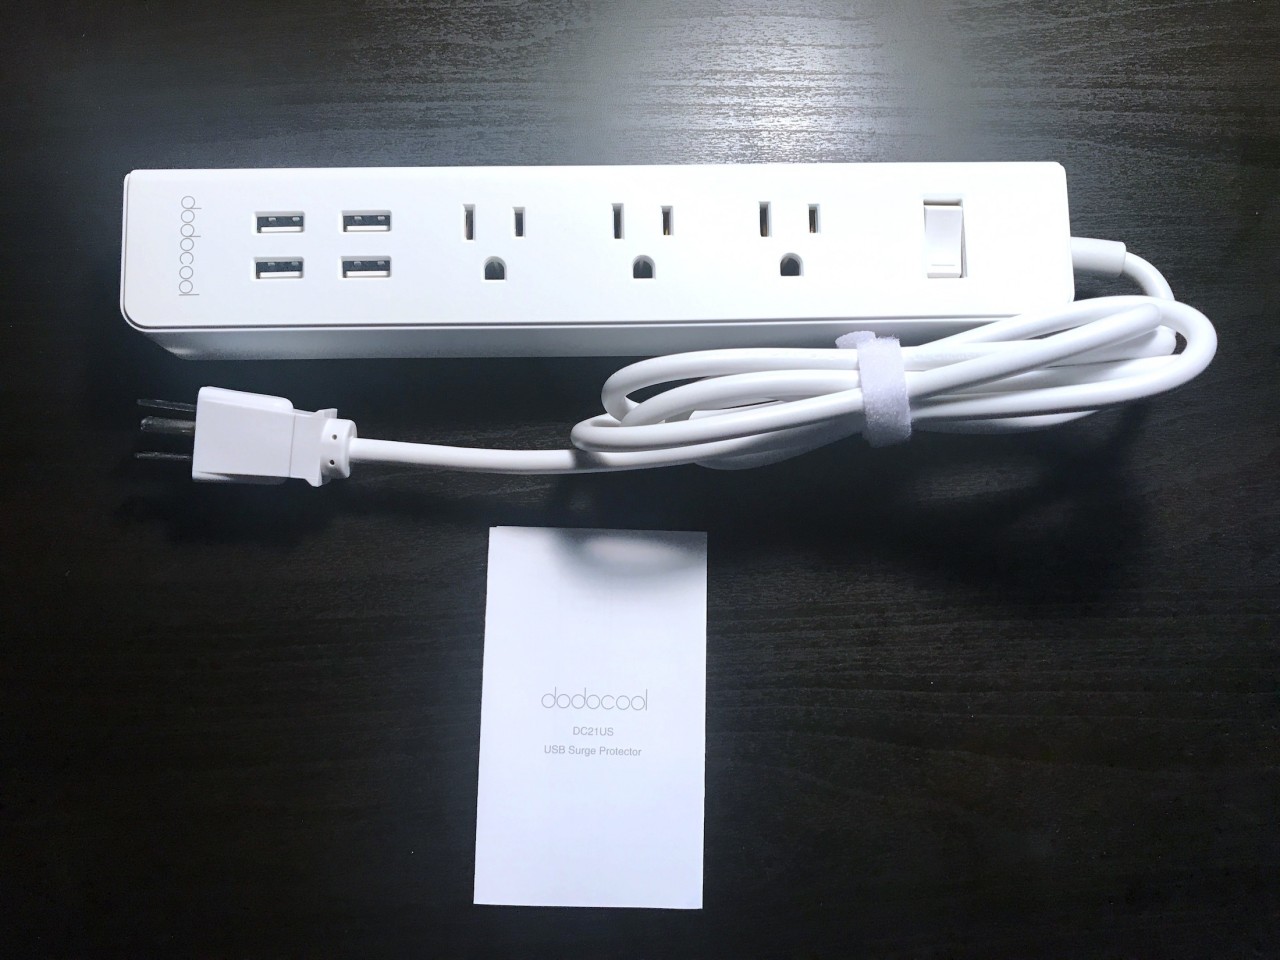 Review Best USB Power Strip Dodocool 4 USB Port and 3 AC Outlets